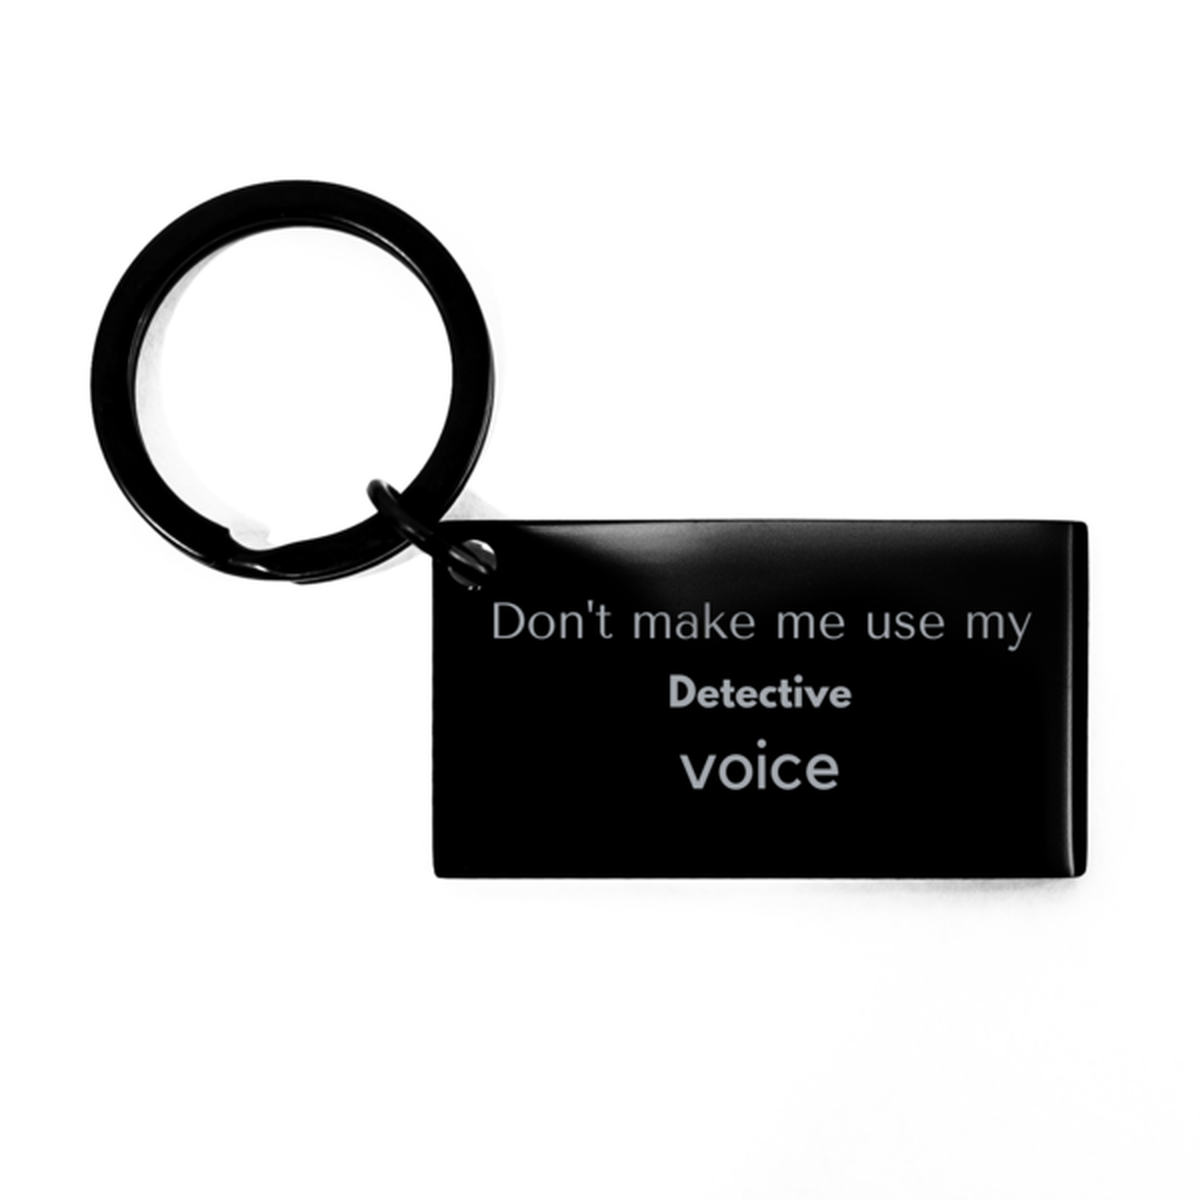 Don't make me use my Detective voice, Sarcasm Detective Gifts, Christmas Detective Keychain Birthday Unique Gifts For Detective Coworkers, Men, Women, Colleague, Friends